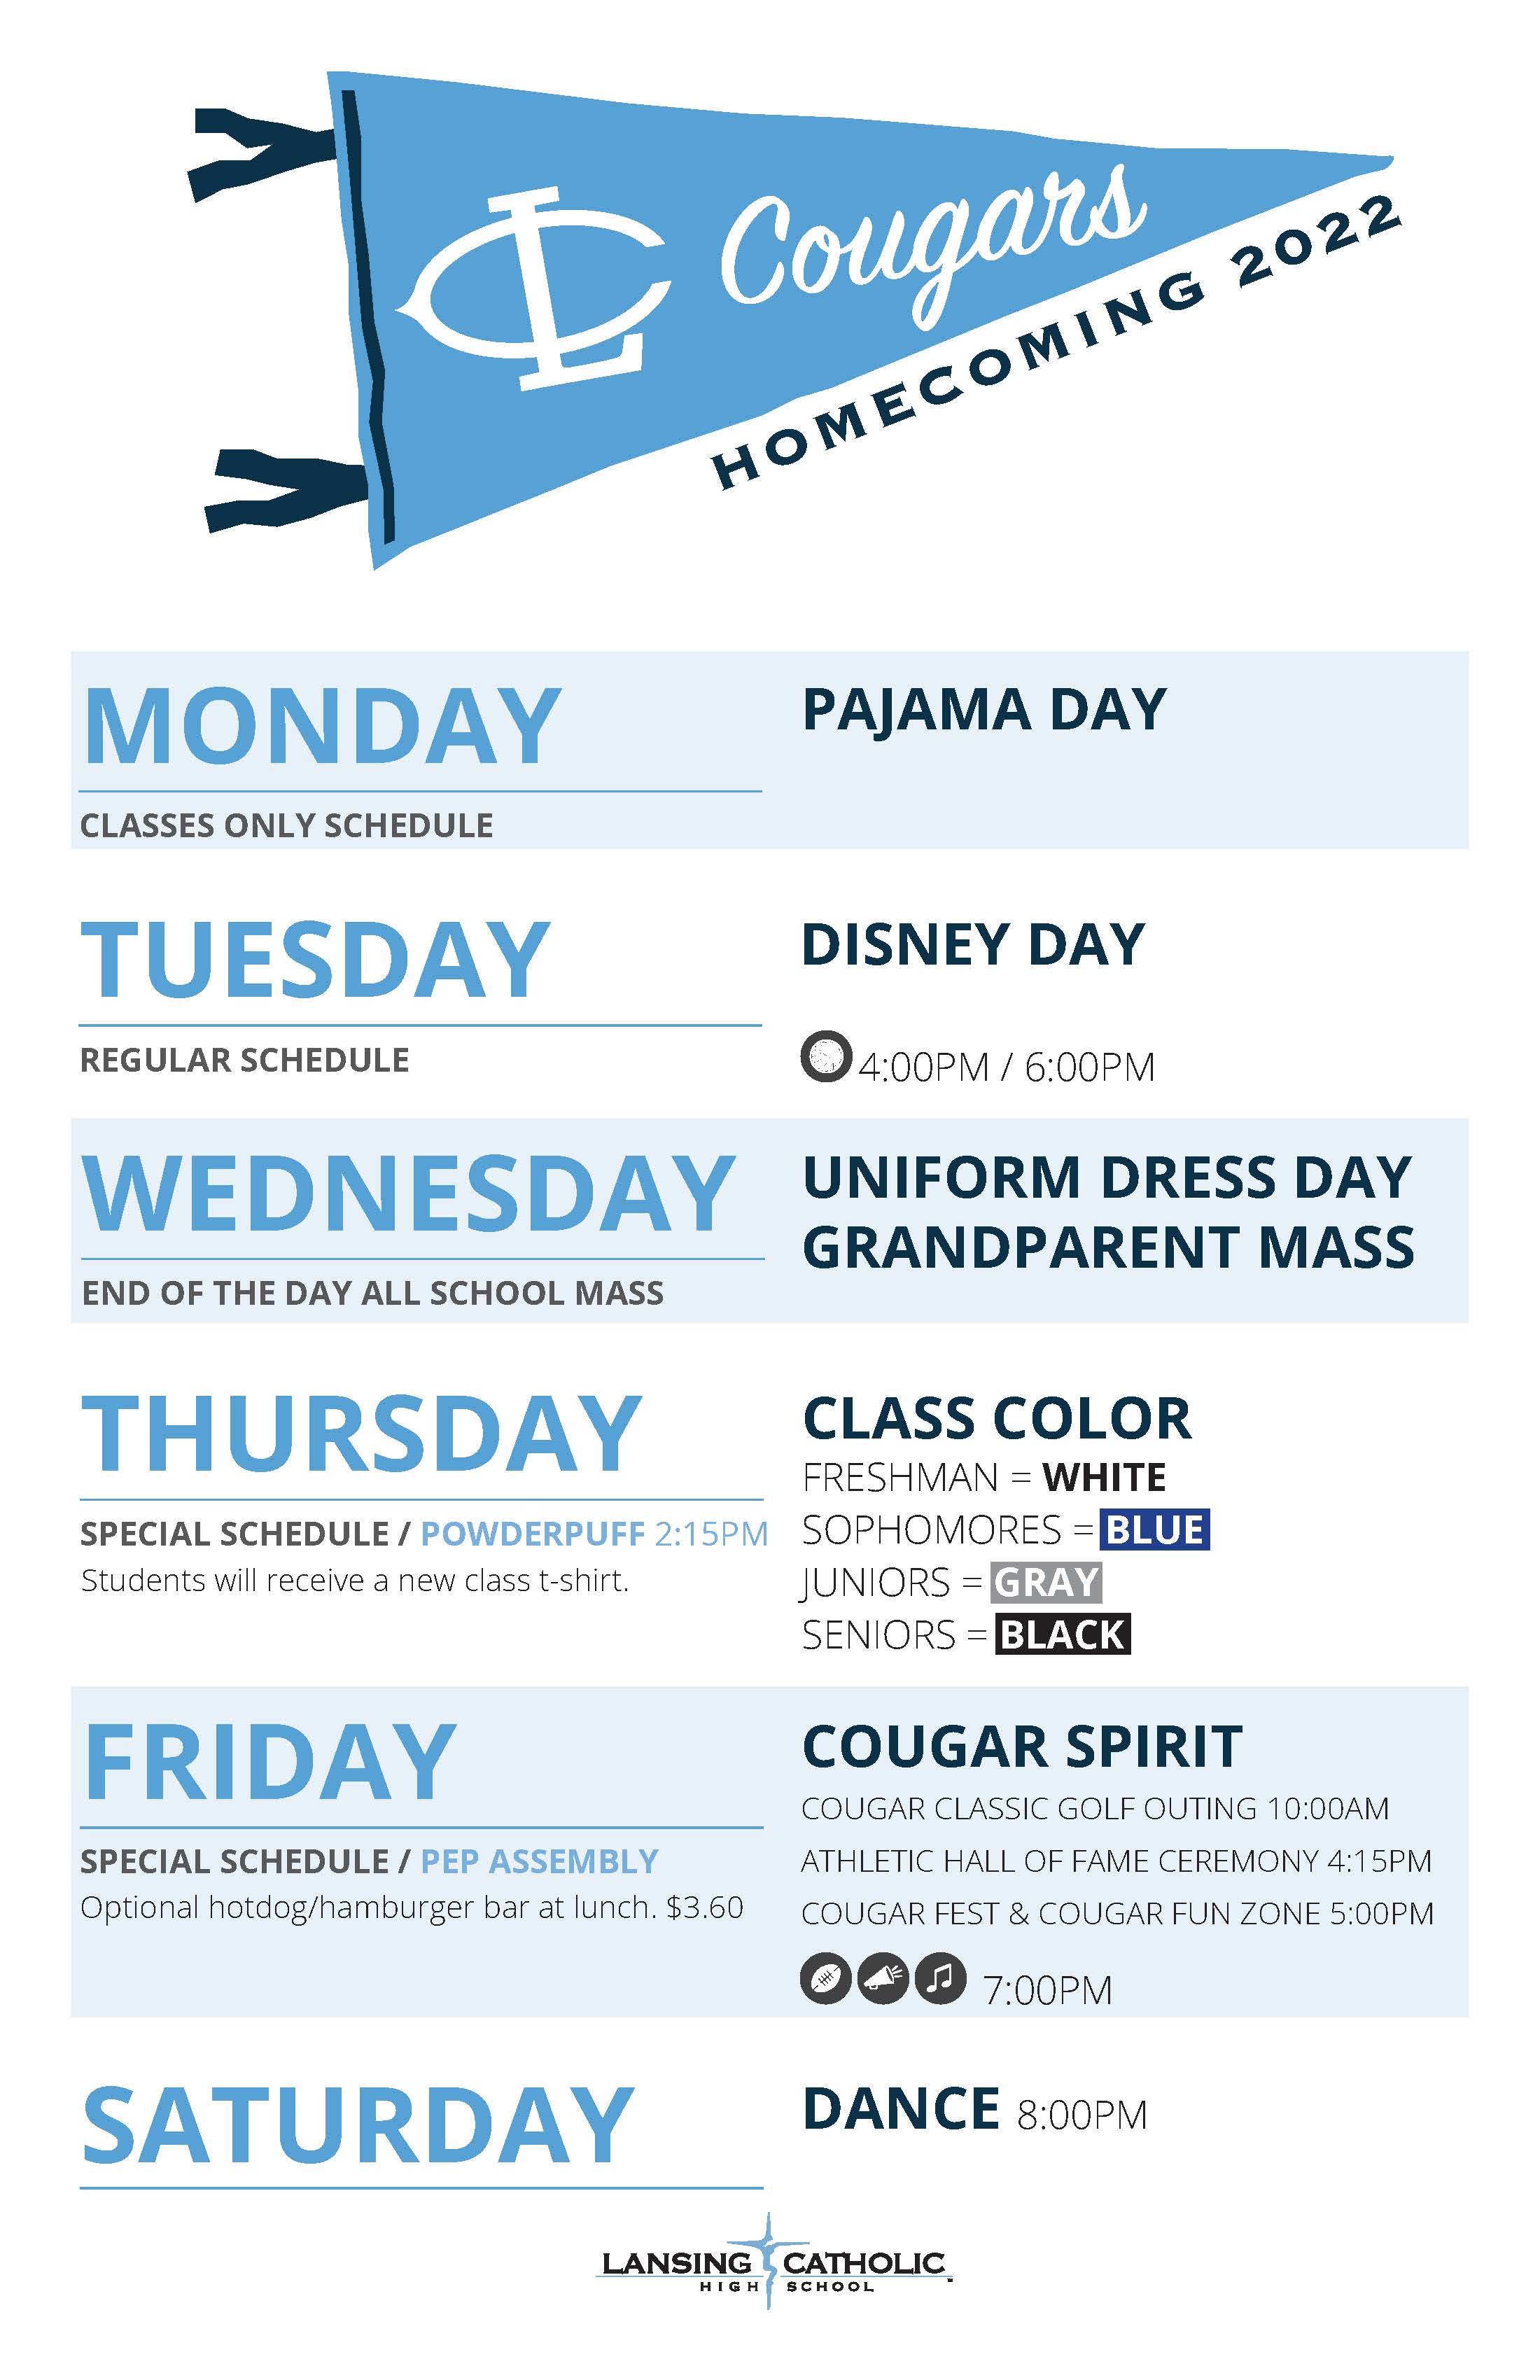 Homecoming Schedule for Students